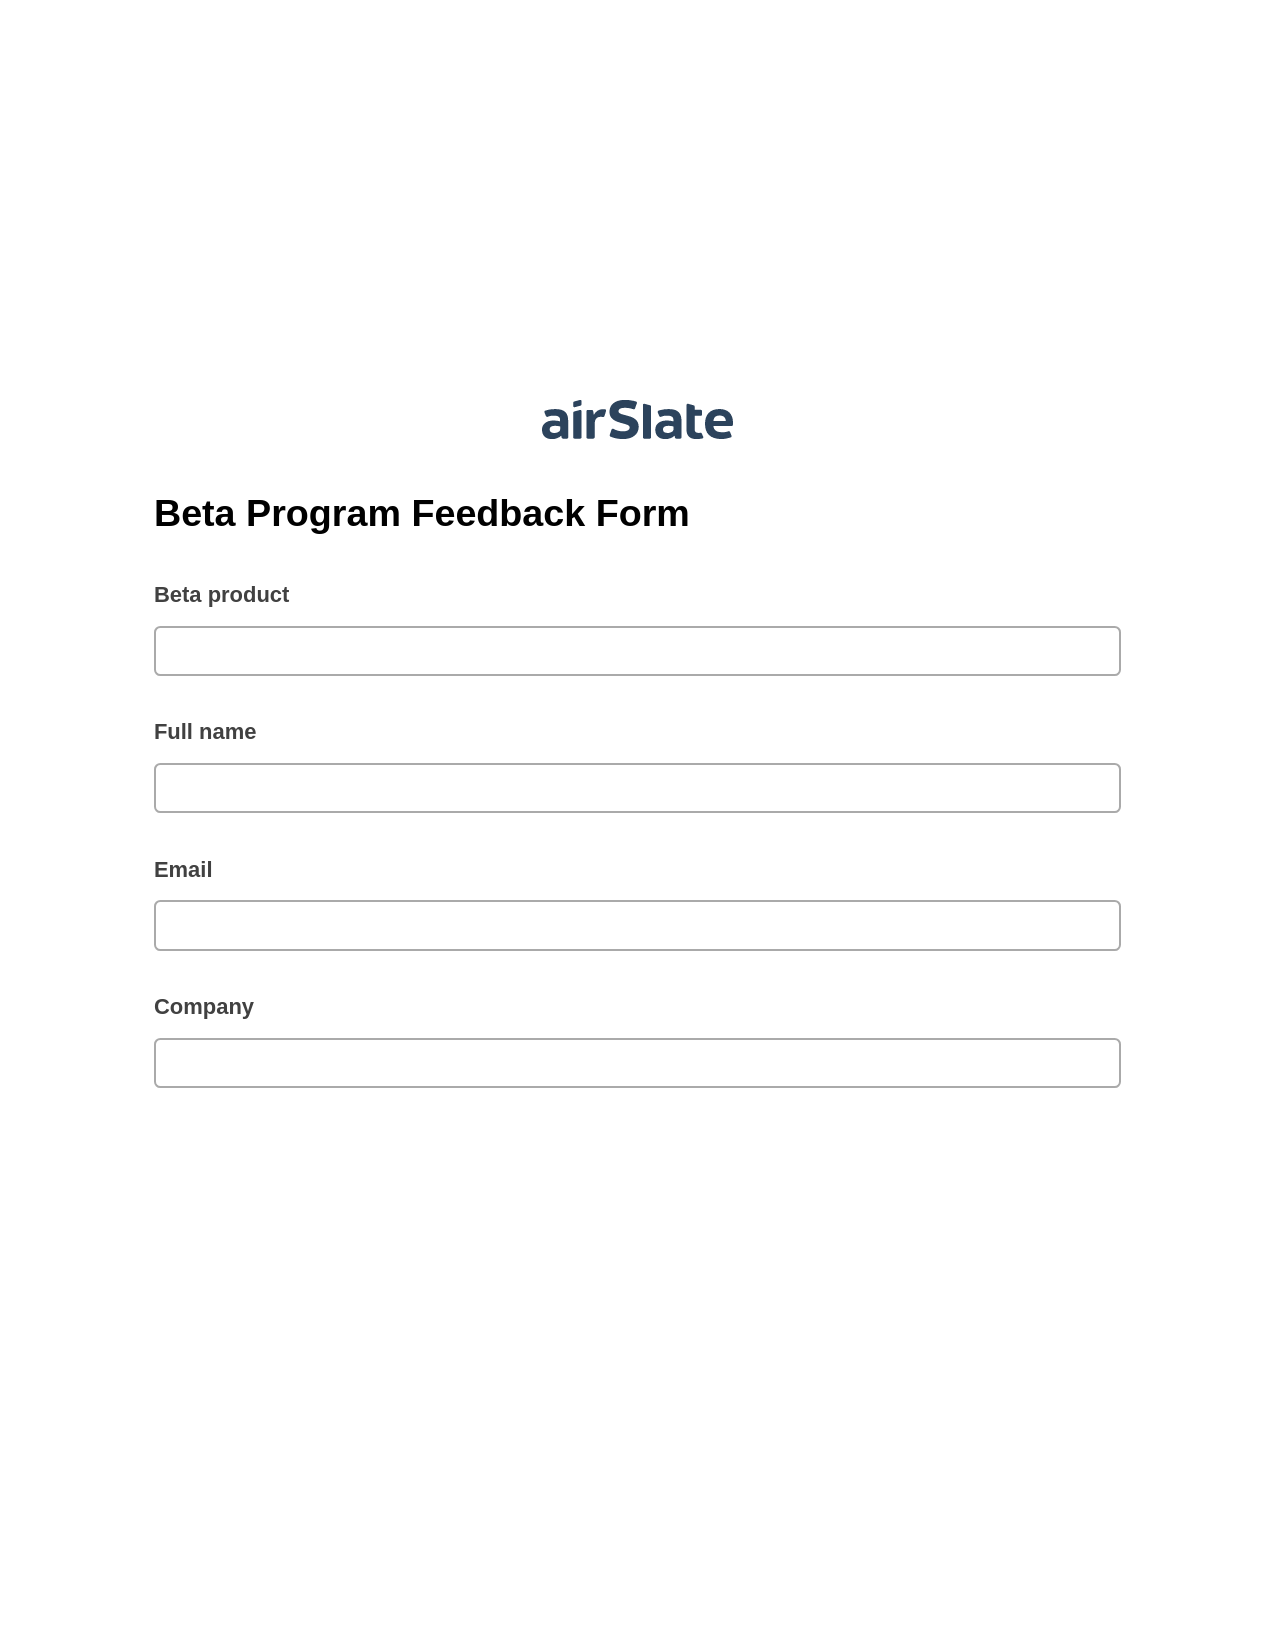 Beta Program Feedback Form Pre-fill Dropdown from Airtable, Unassign Role Bot, Dropbox Bot